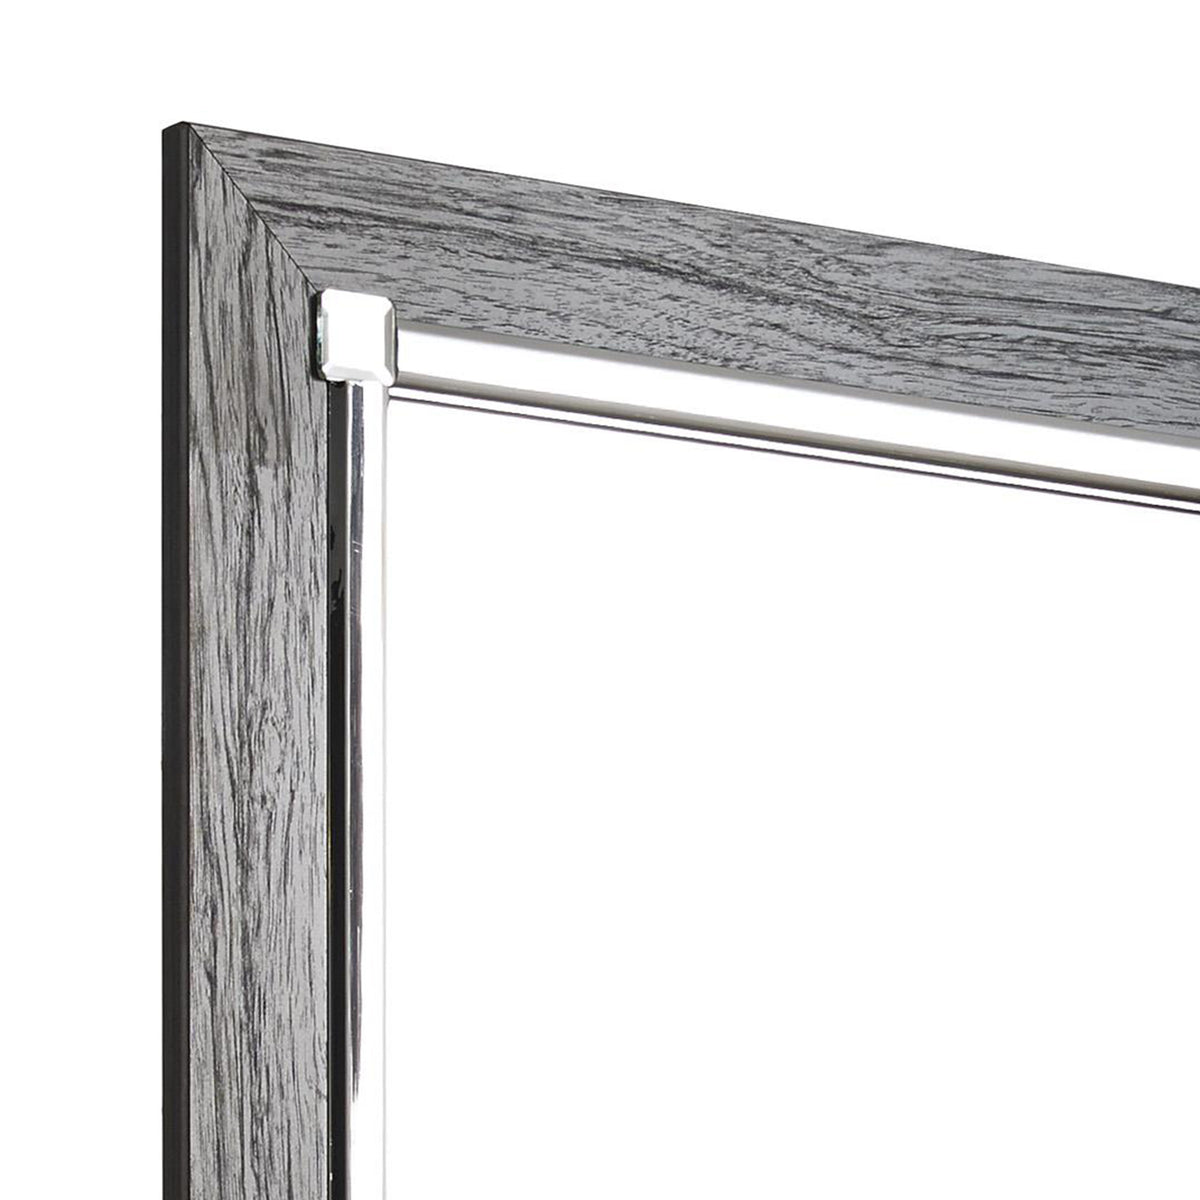 Contemporary Square Shape Bedroom Mirror with Wood Grain Texture in Gray - BM209334